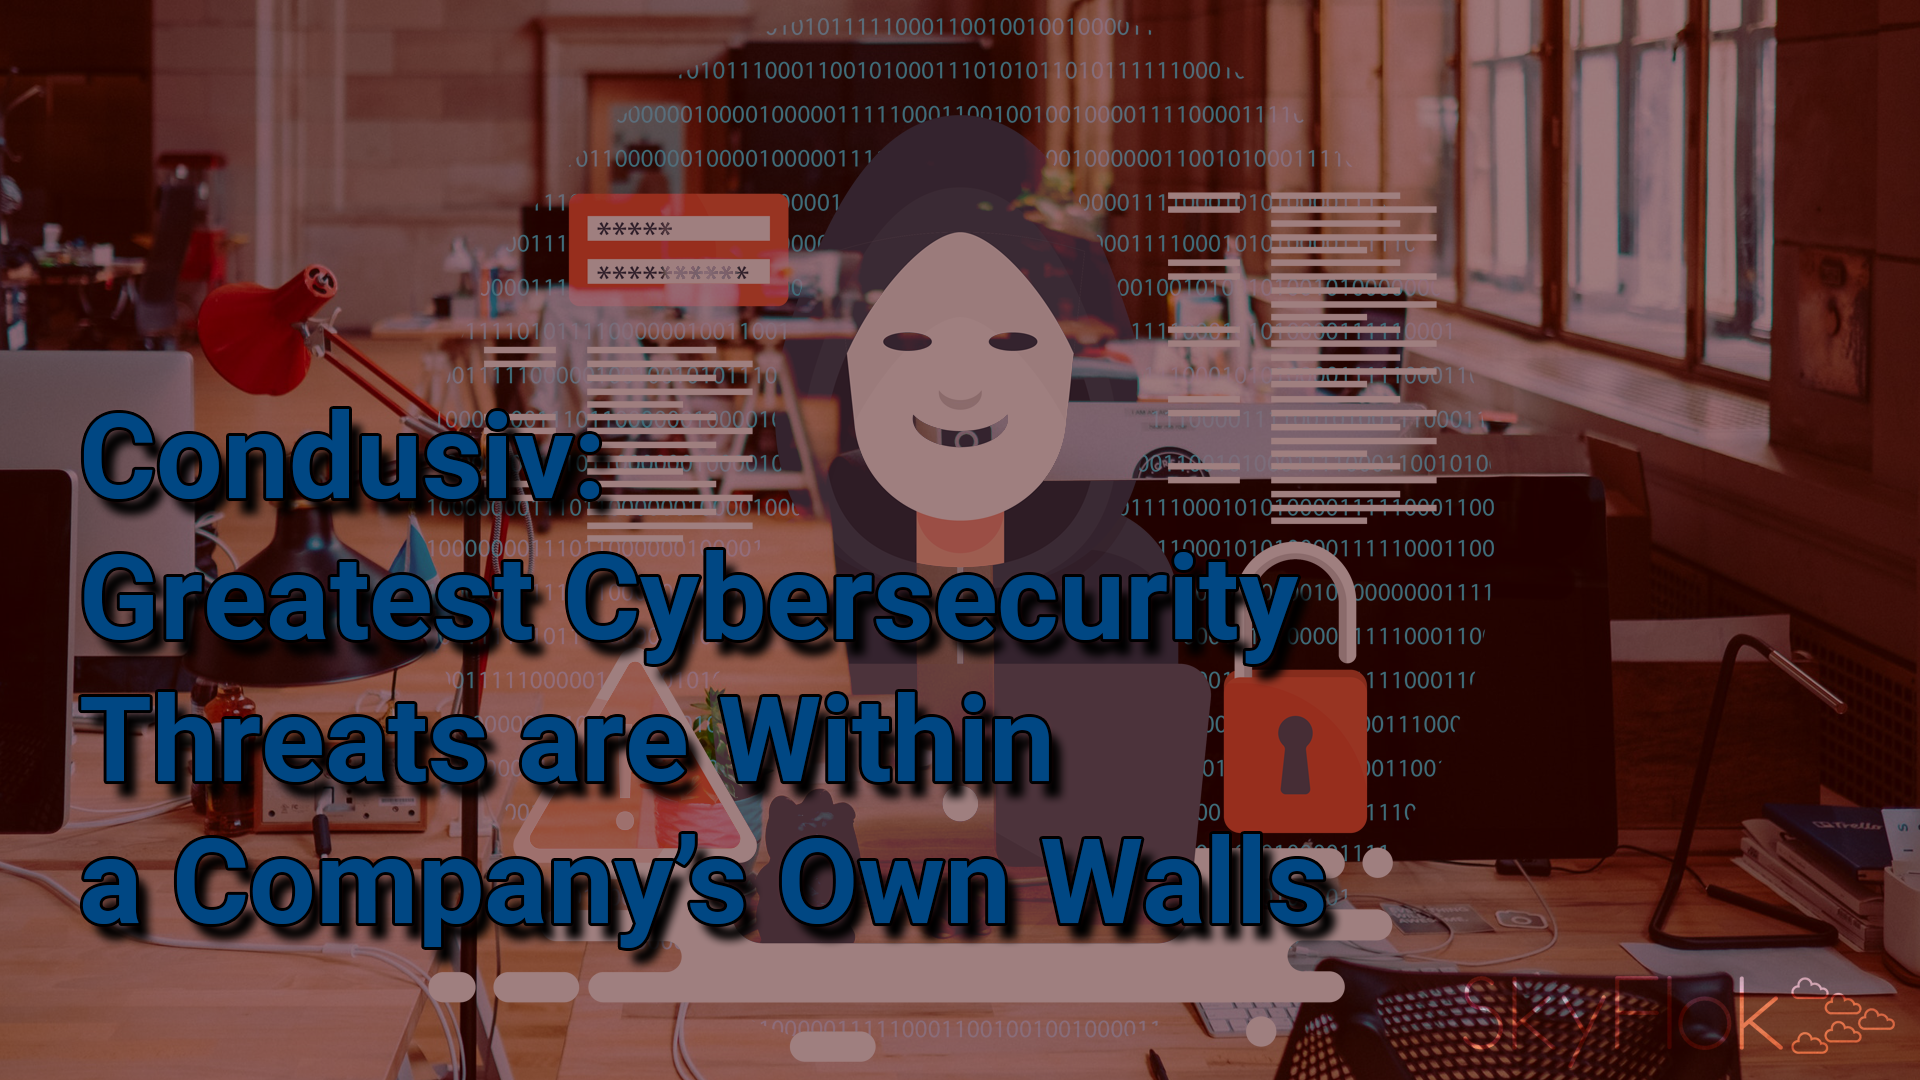 Condusiv: Greatest Cyber security Threats are Within a Company’s Own Walls